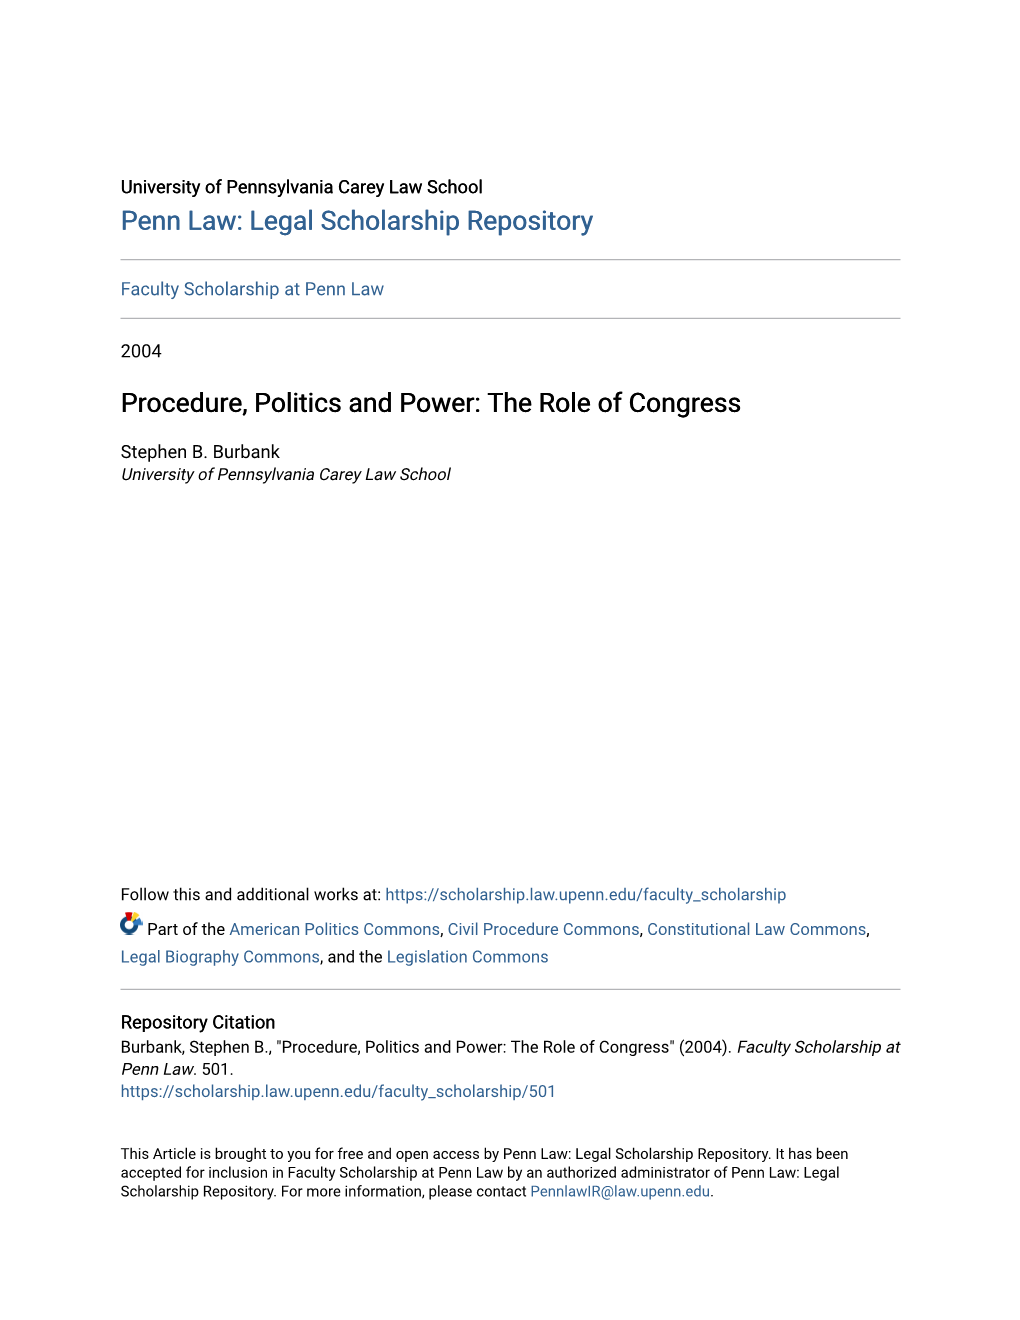 Procedure, Politics and Power: the Role of Congress